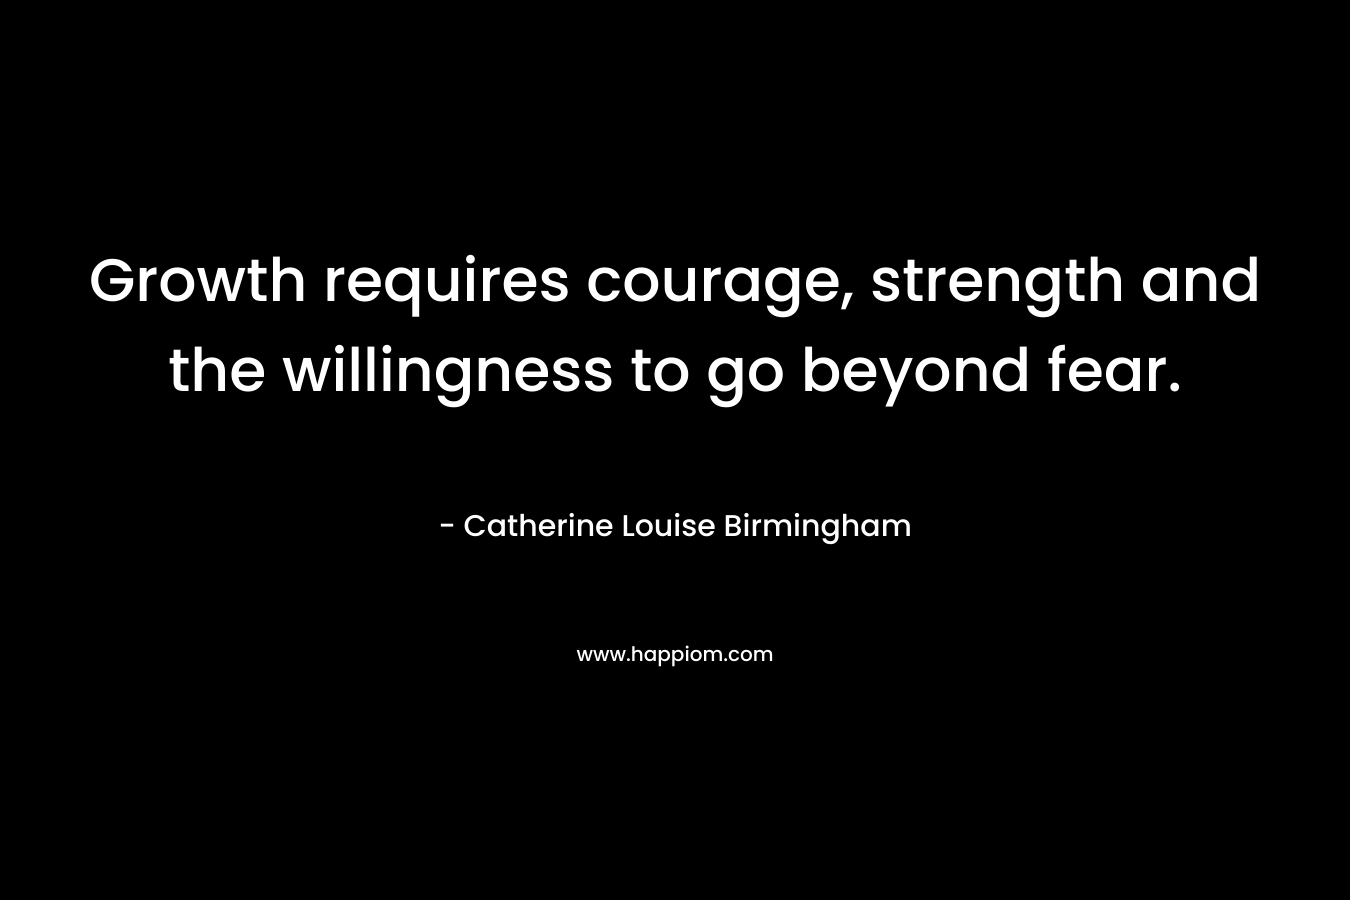 Growth requires courage, strength and the willingness to go beyond fear. – Catherine Louise Birmingham